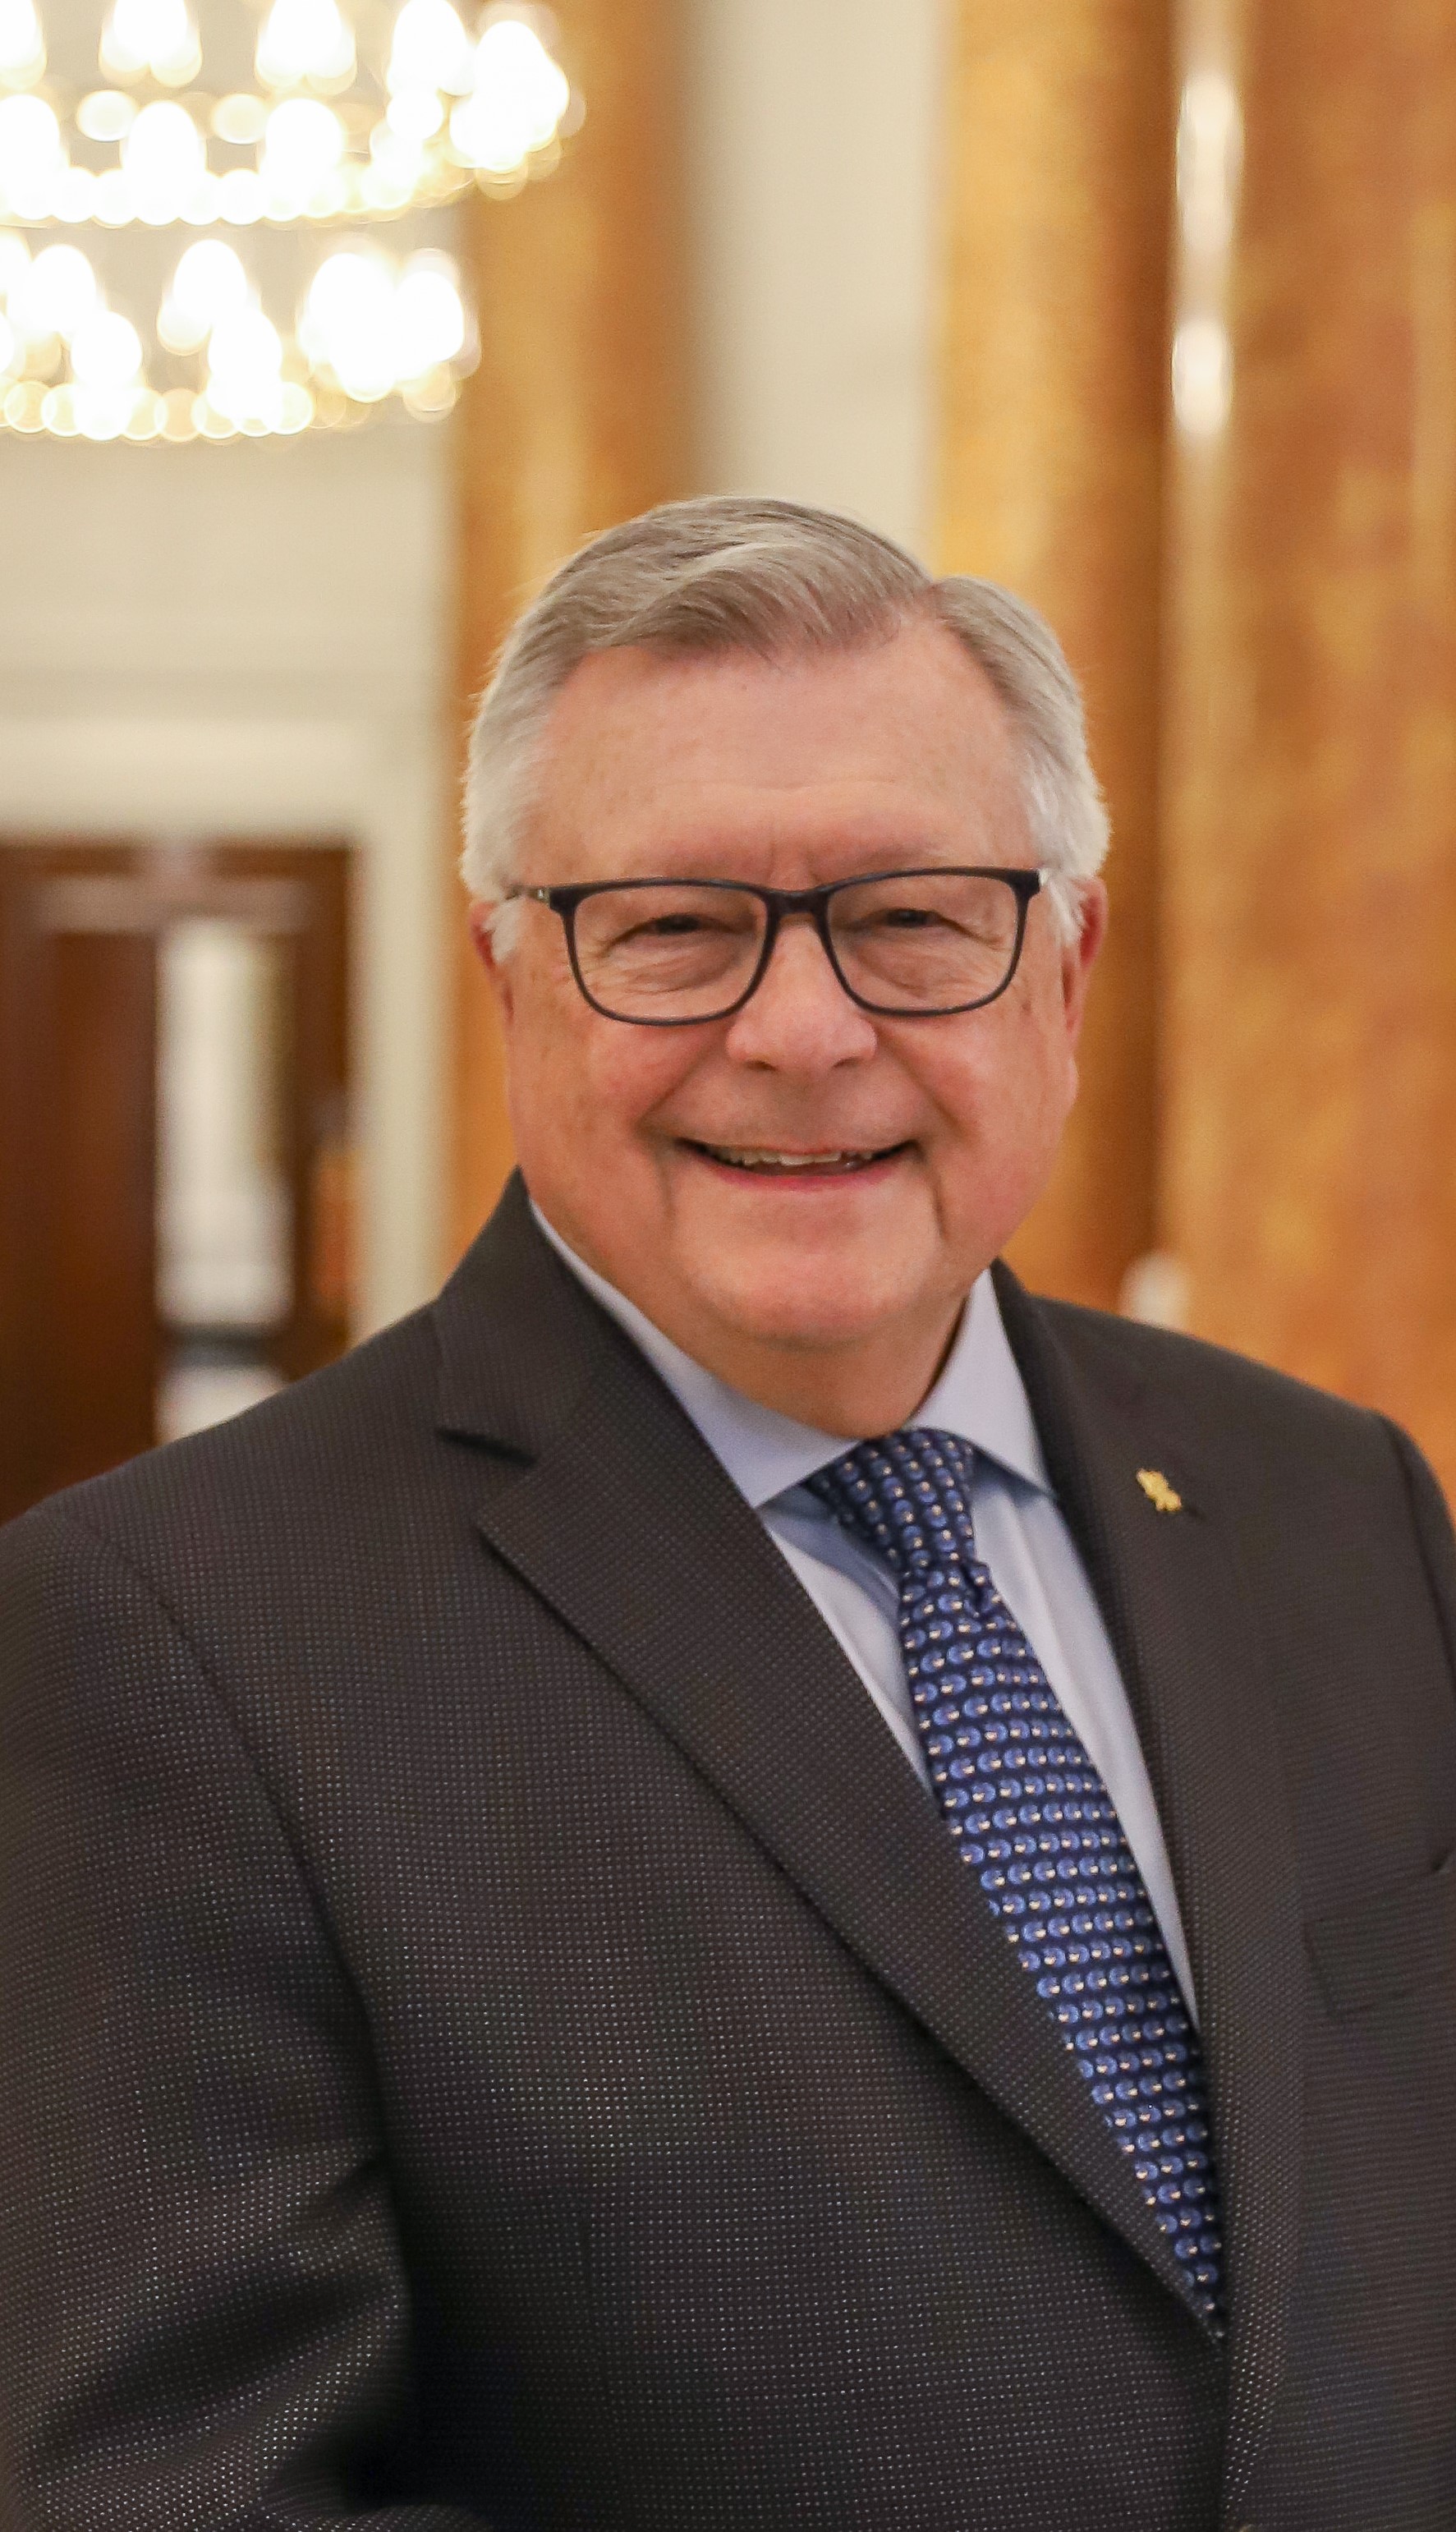 The Honourable Ralph Goodale, High Commissioner for Canada in the United Kingdom of Great Britain and Northern Ireland and Permanent Representative to the International Maritime Organization